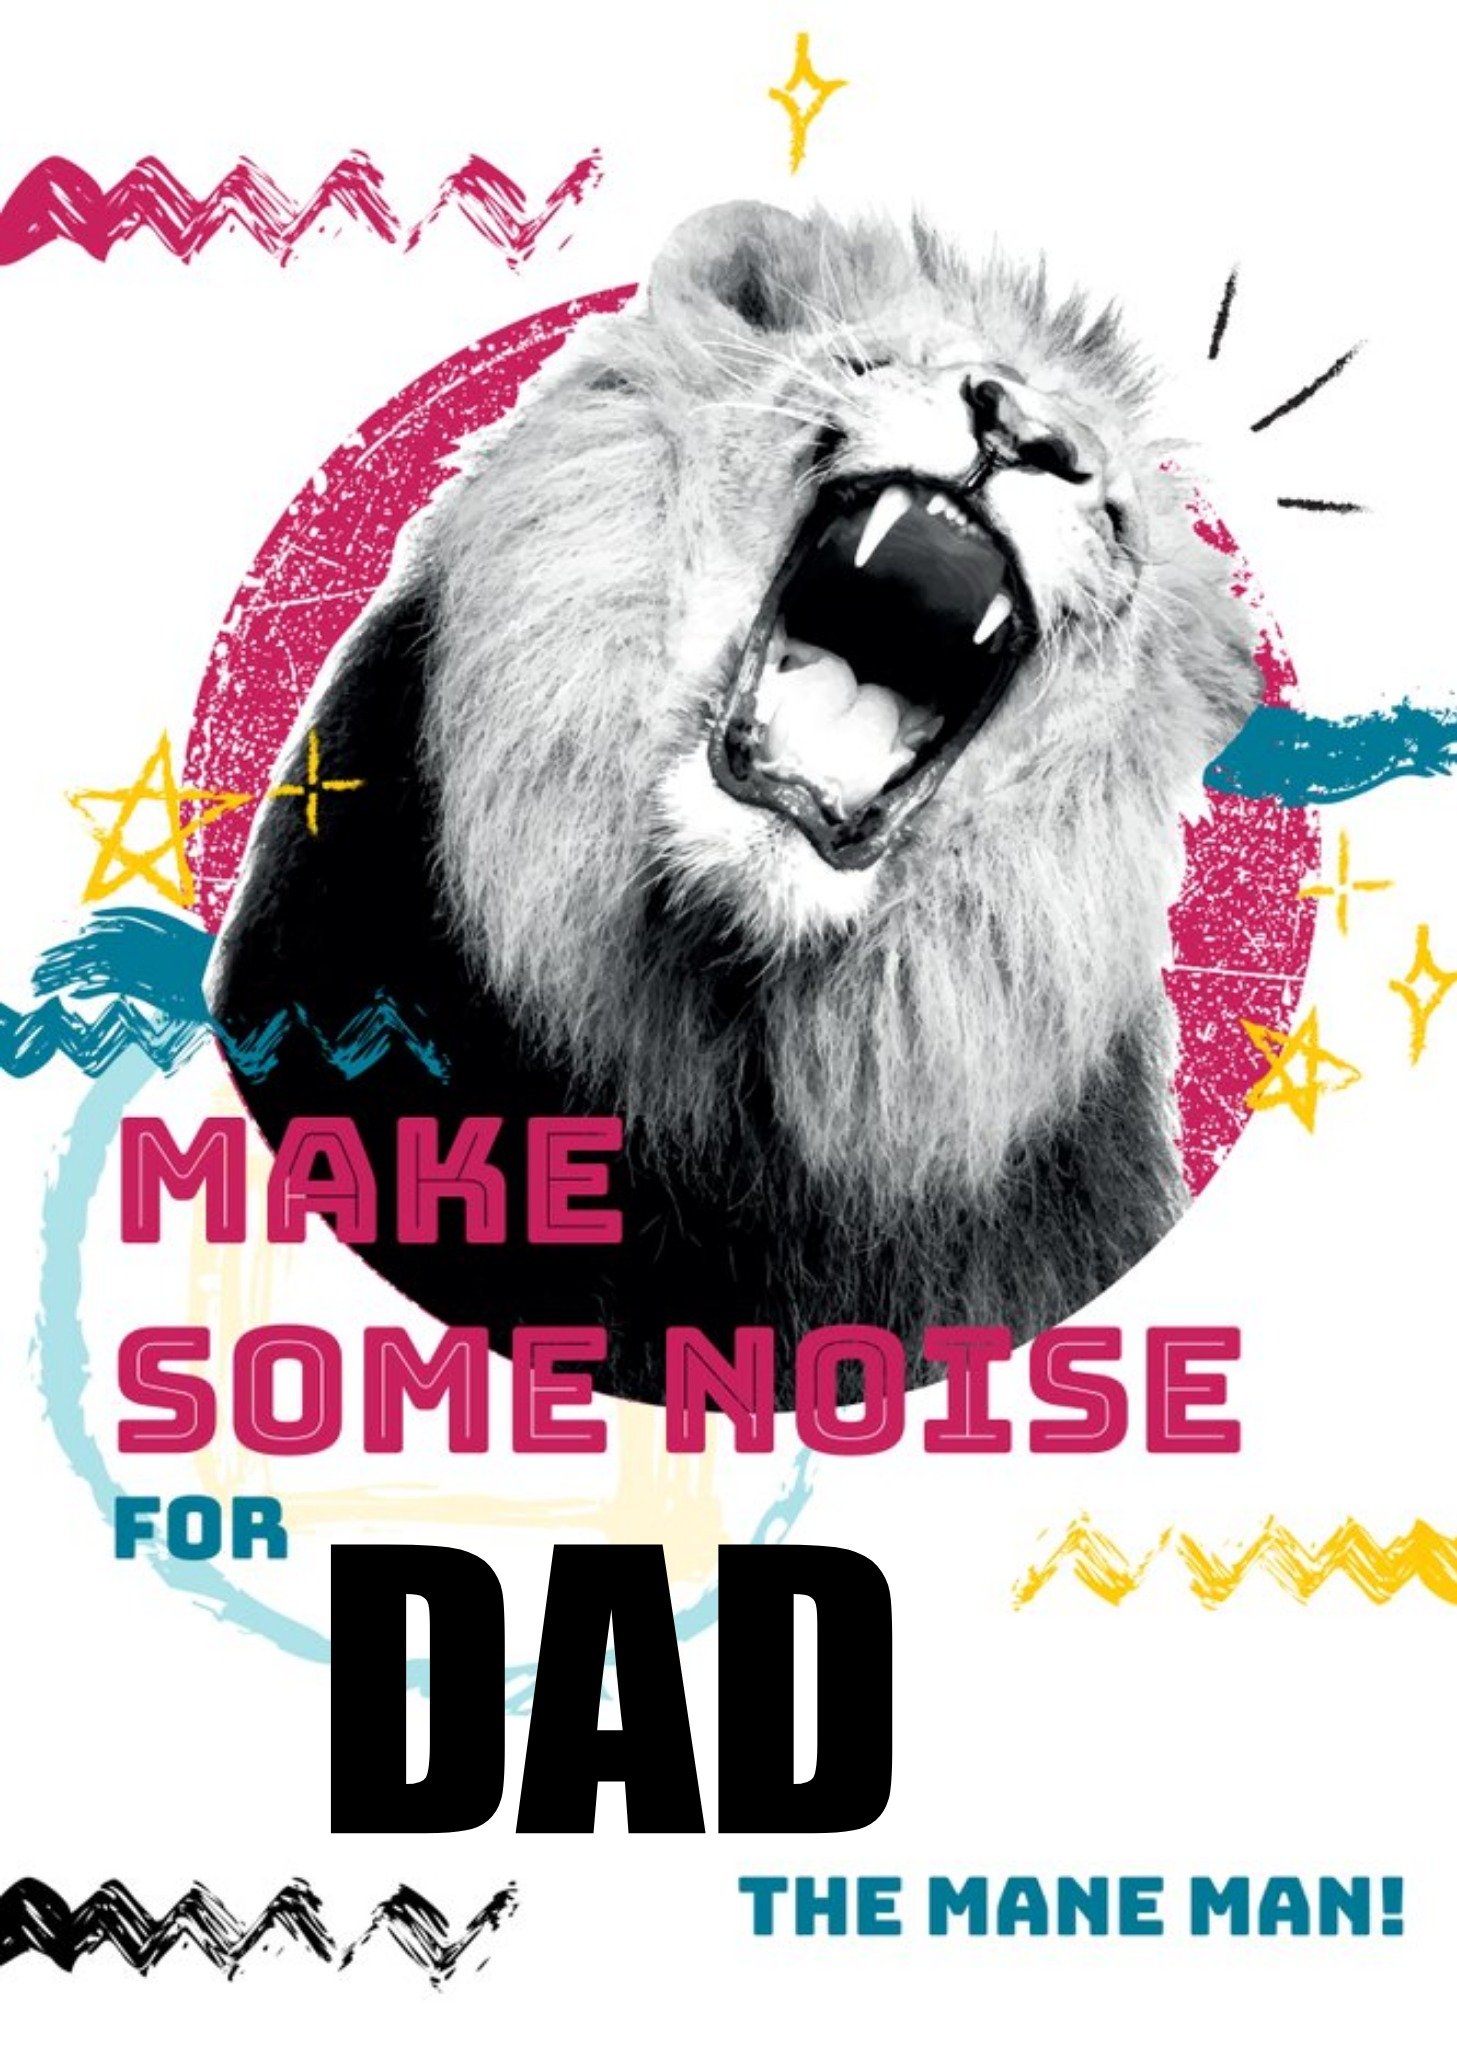 Moonpig Animal Planet Make Some Noise For Dad Lion Father's Day Card, Large